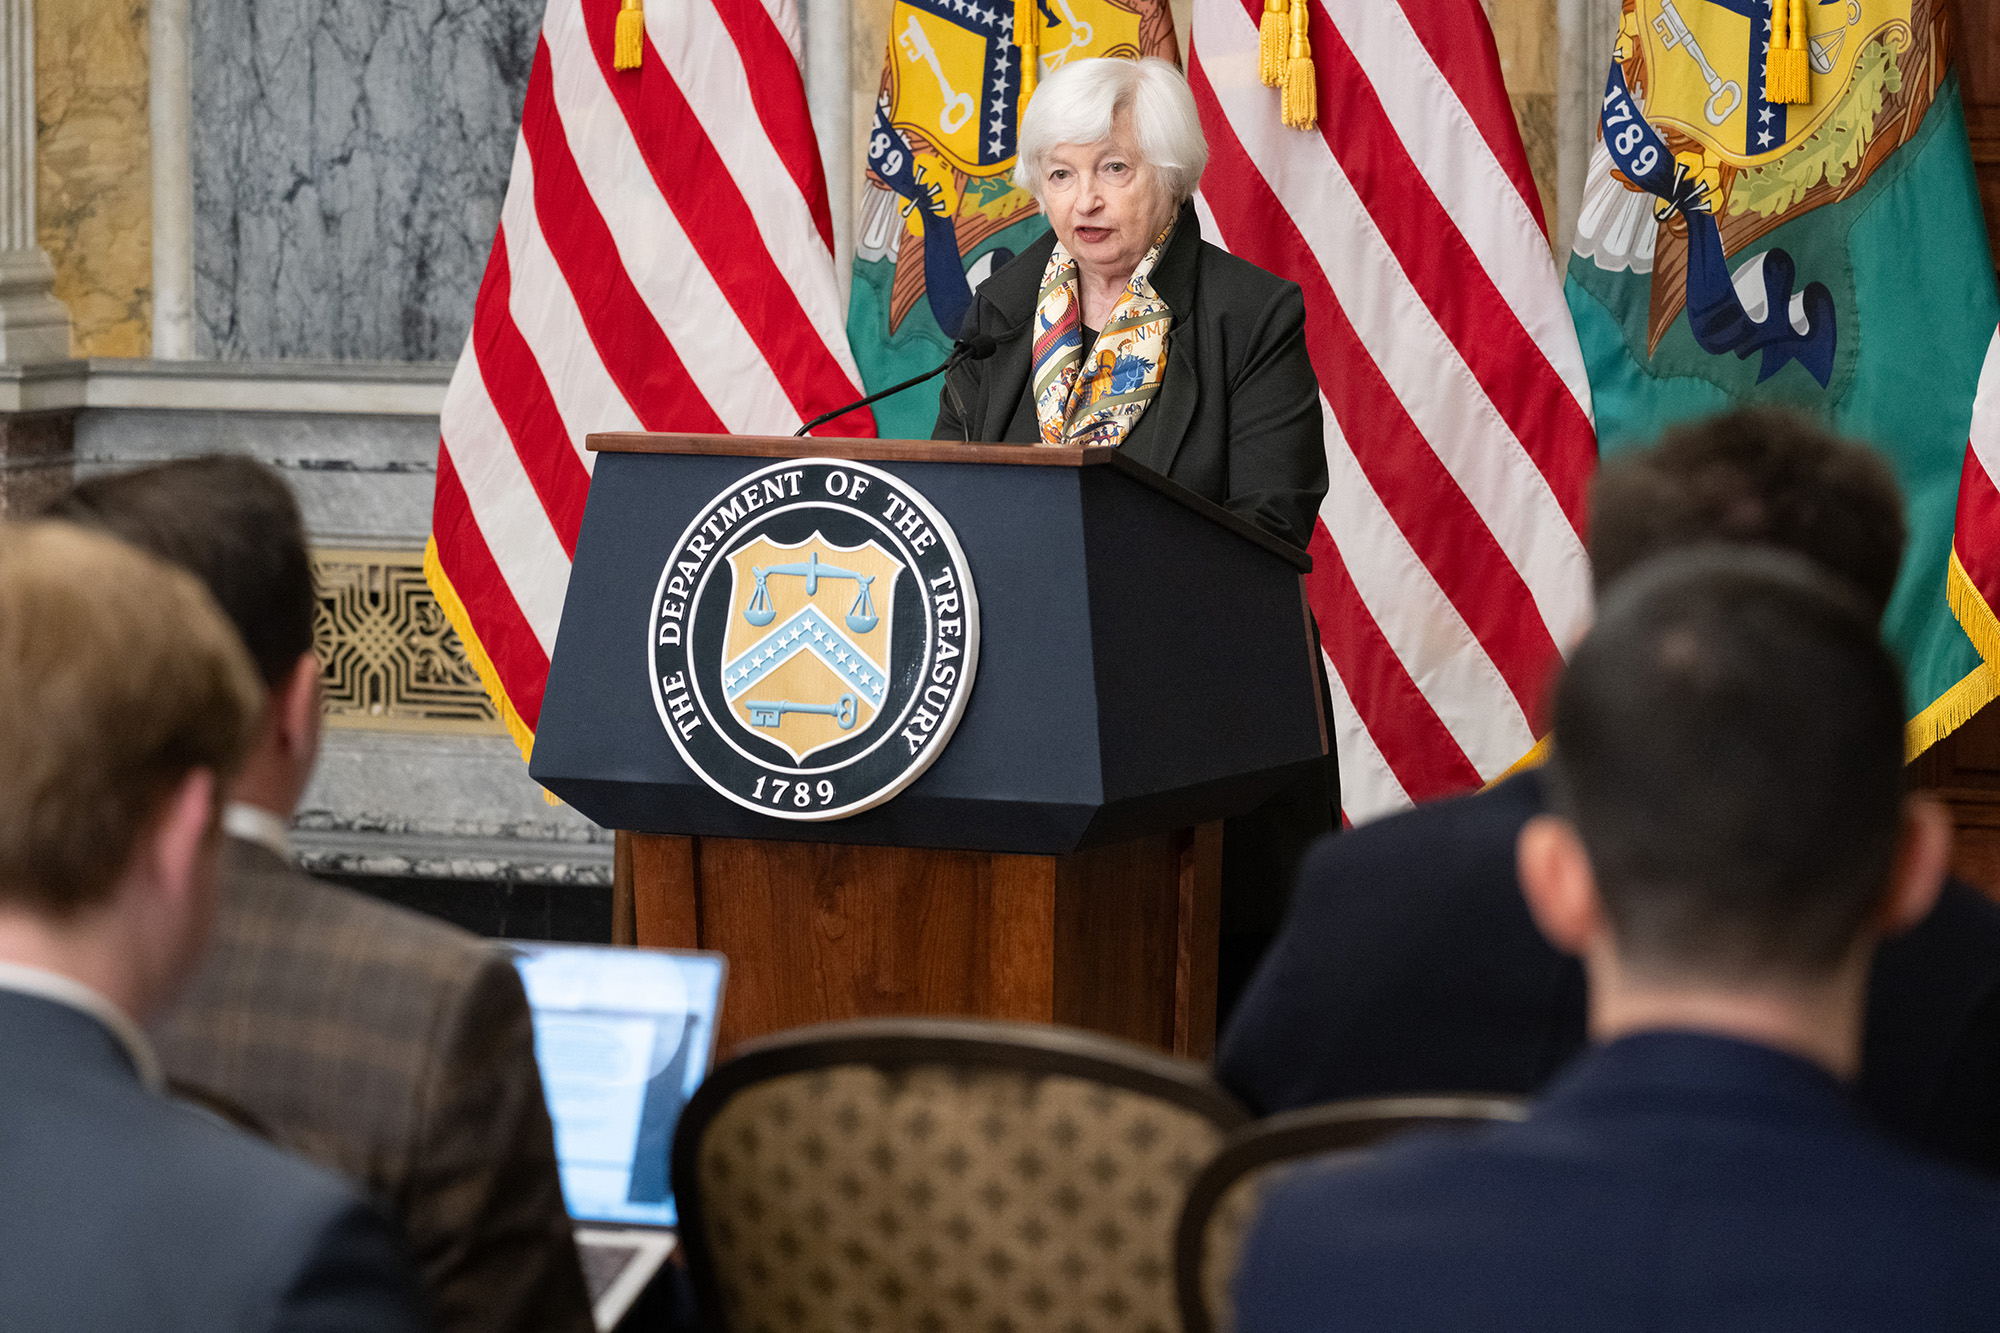 US Treasury Secretary Janet Yellen speaks during a press conference today amid the IMF-World Bank Group spring meetings, at the Treasury Department in Washington, DC.